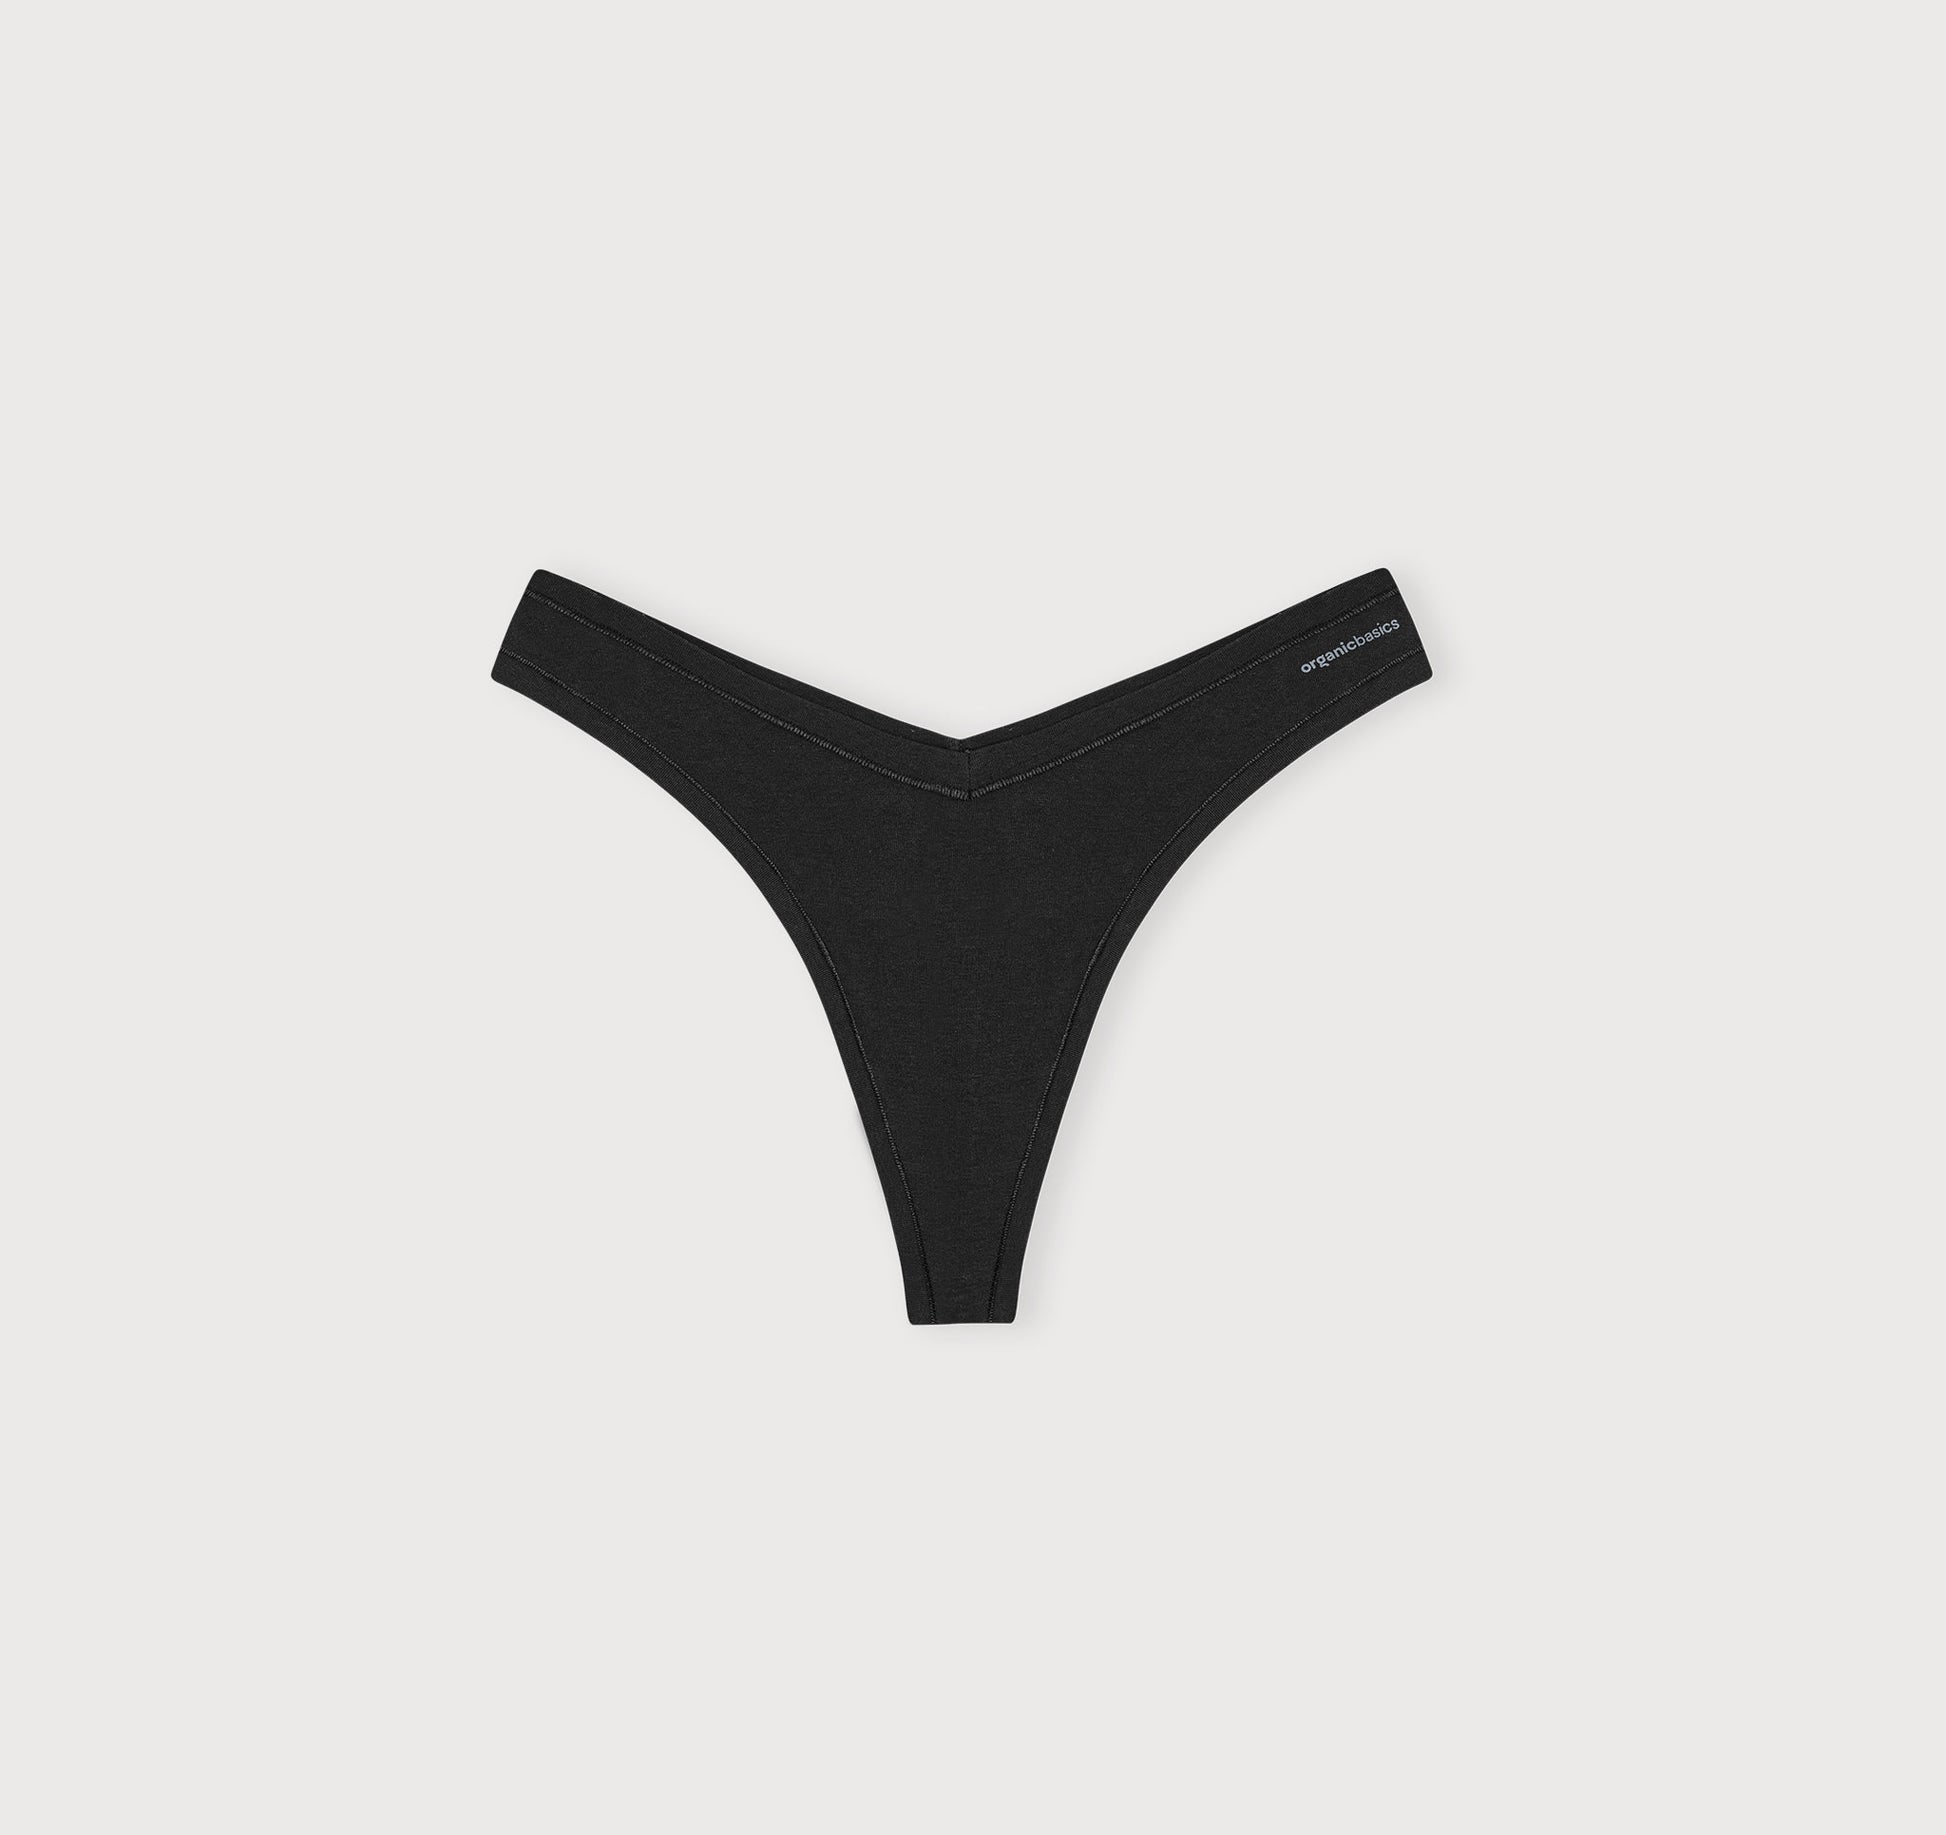 Buy Flex Thong 3-pack, Fast Delivery